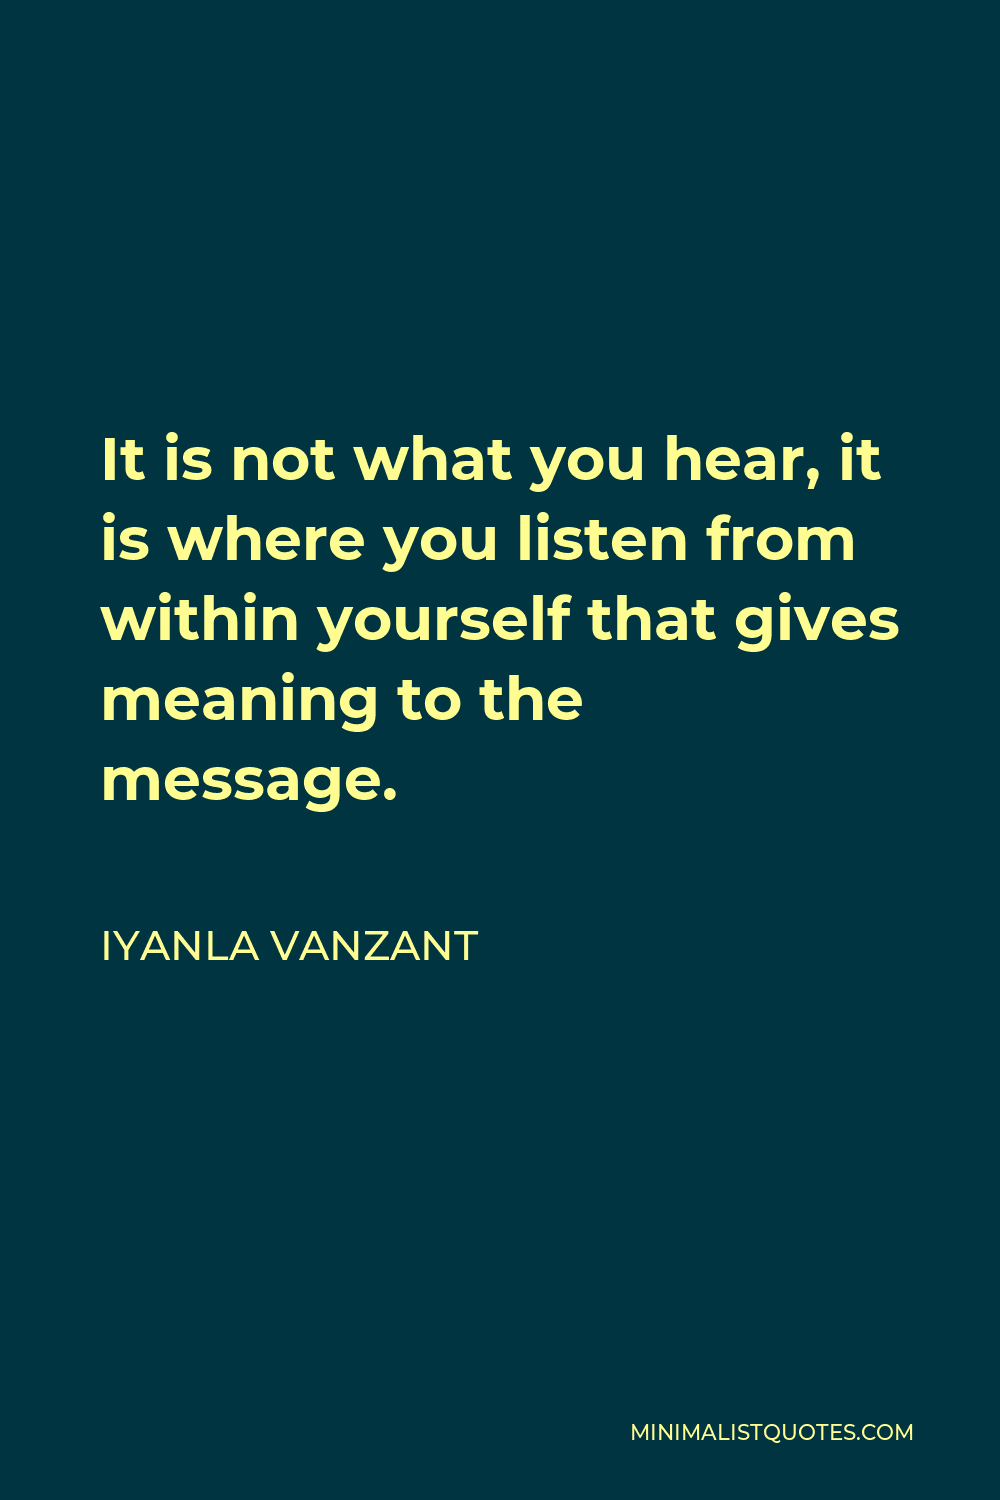 Iyanla Vanzant Quote - It is not what you hear, it is where you listen from within yourself that gives meaning to the message.